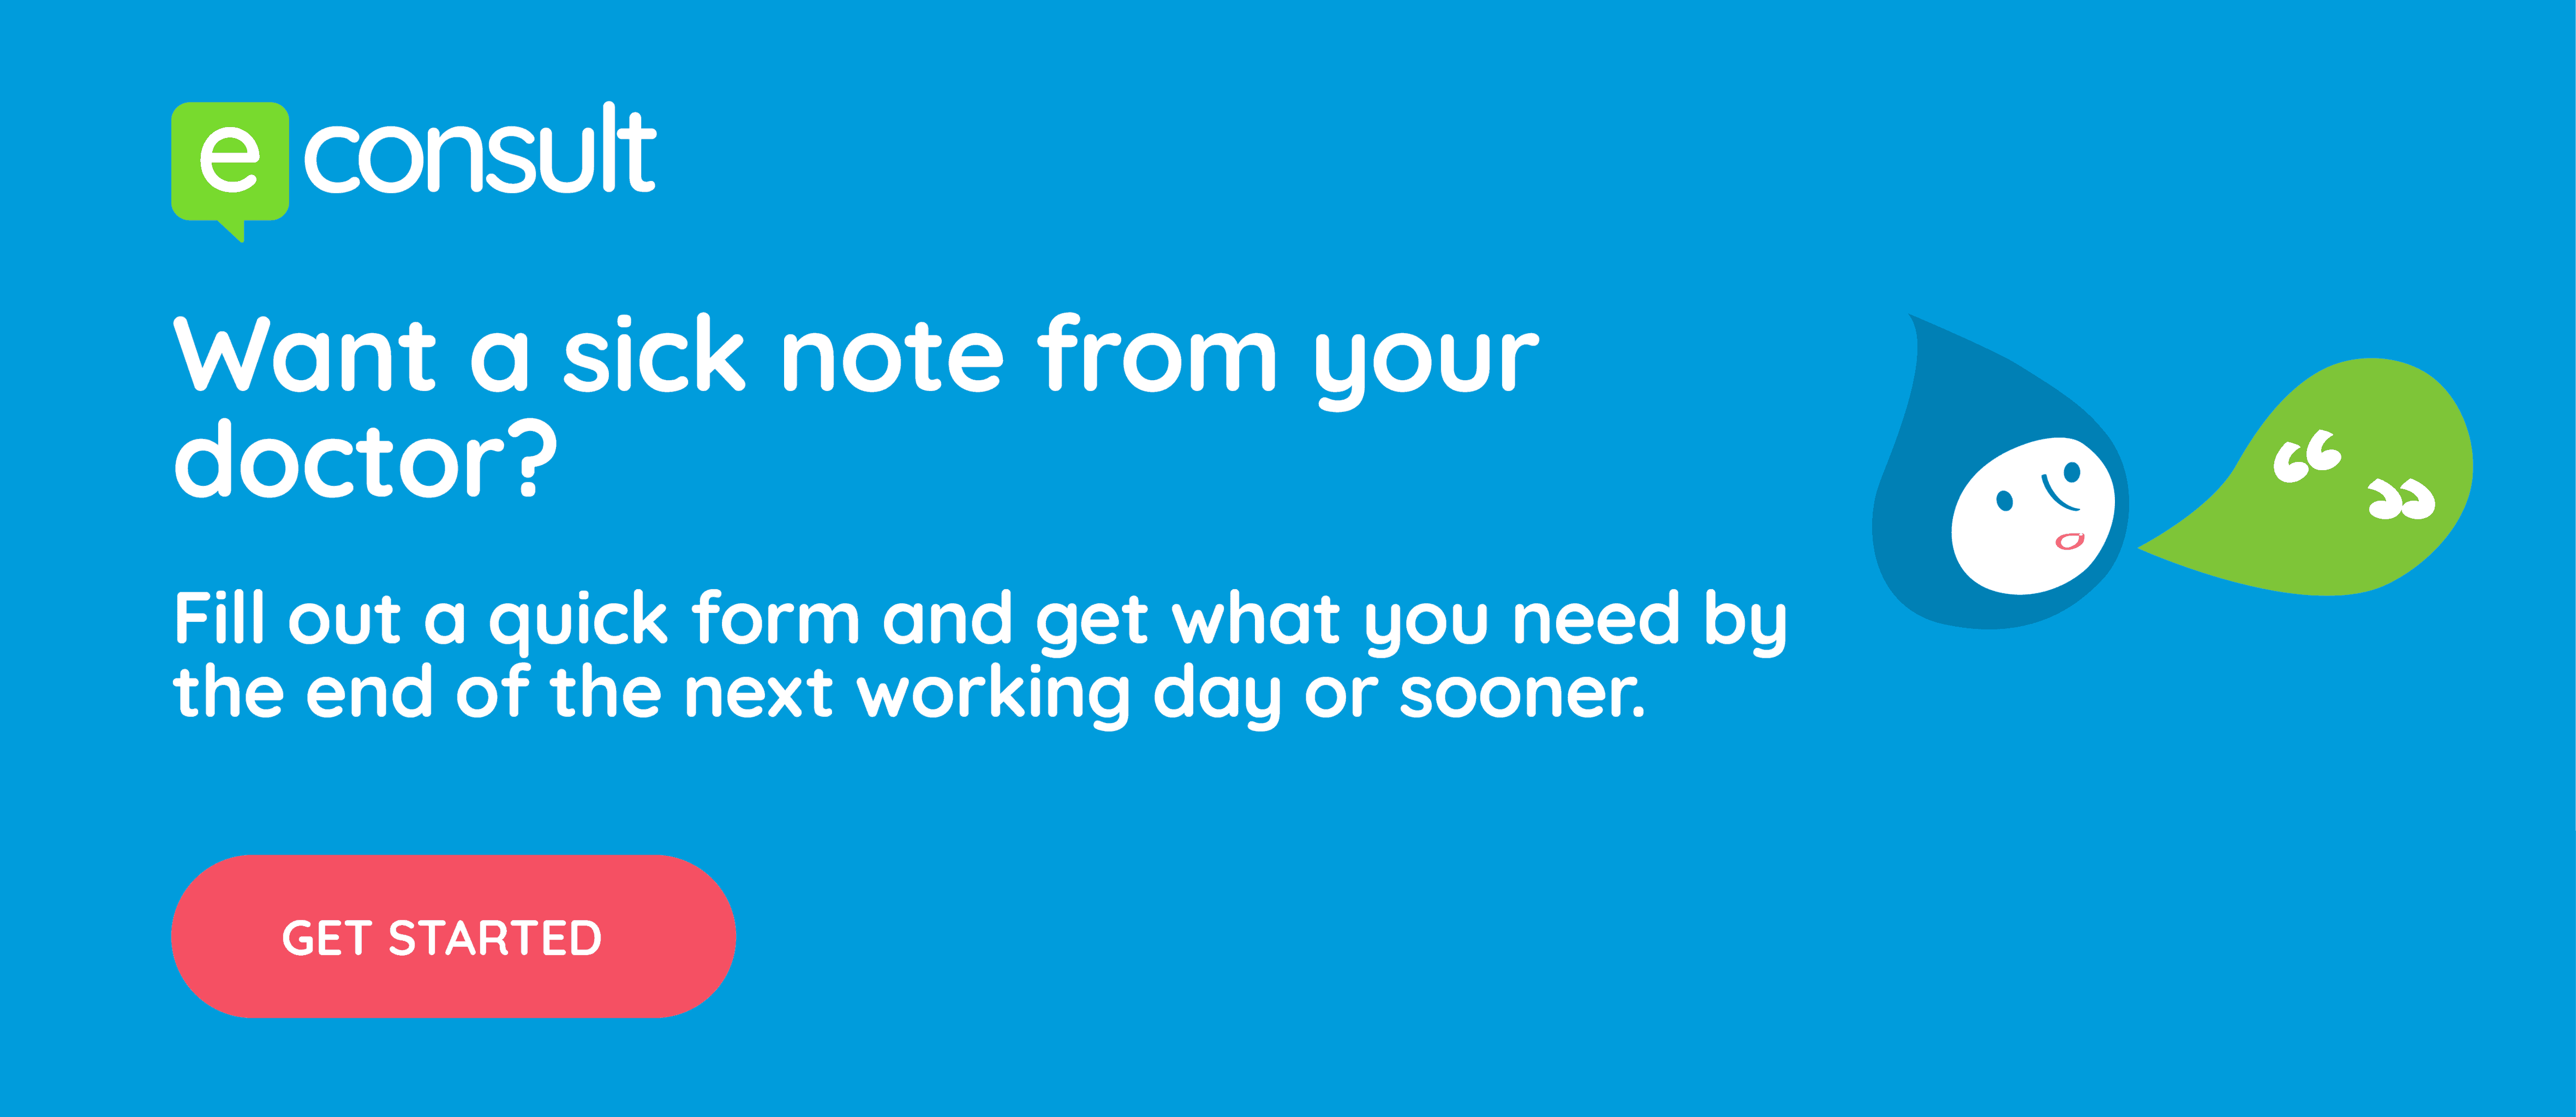 Want a sick note from your doctor? Get started online.